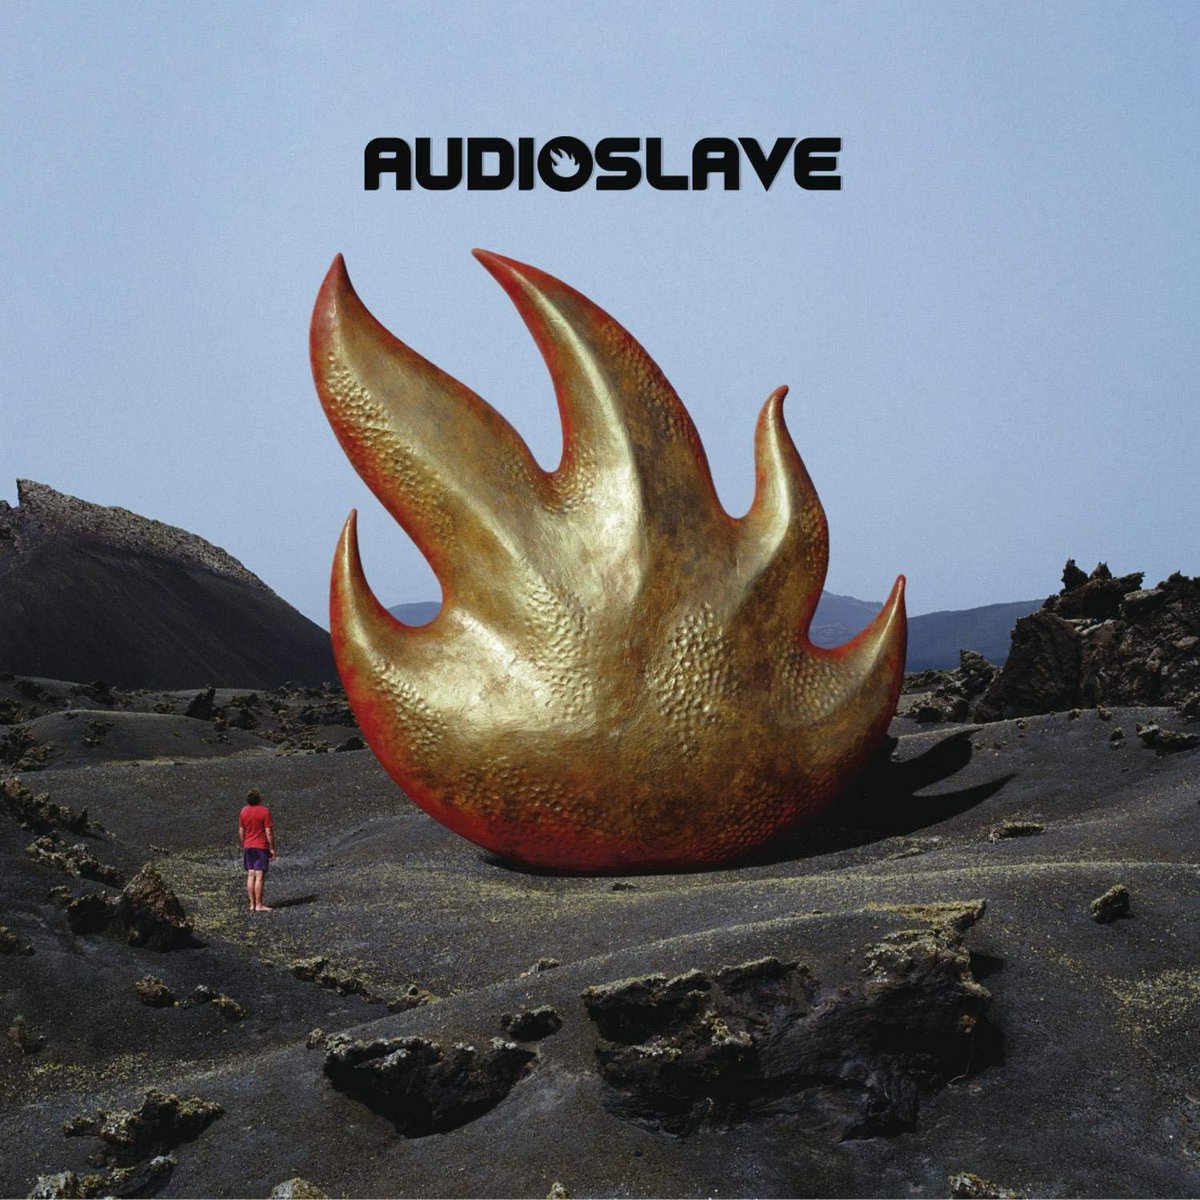 Audioslave released their debut album on this day 19 years ago!